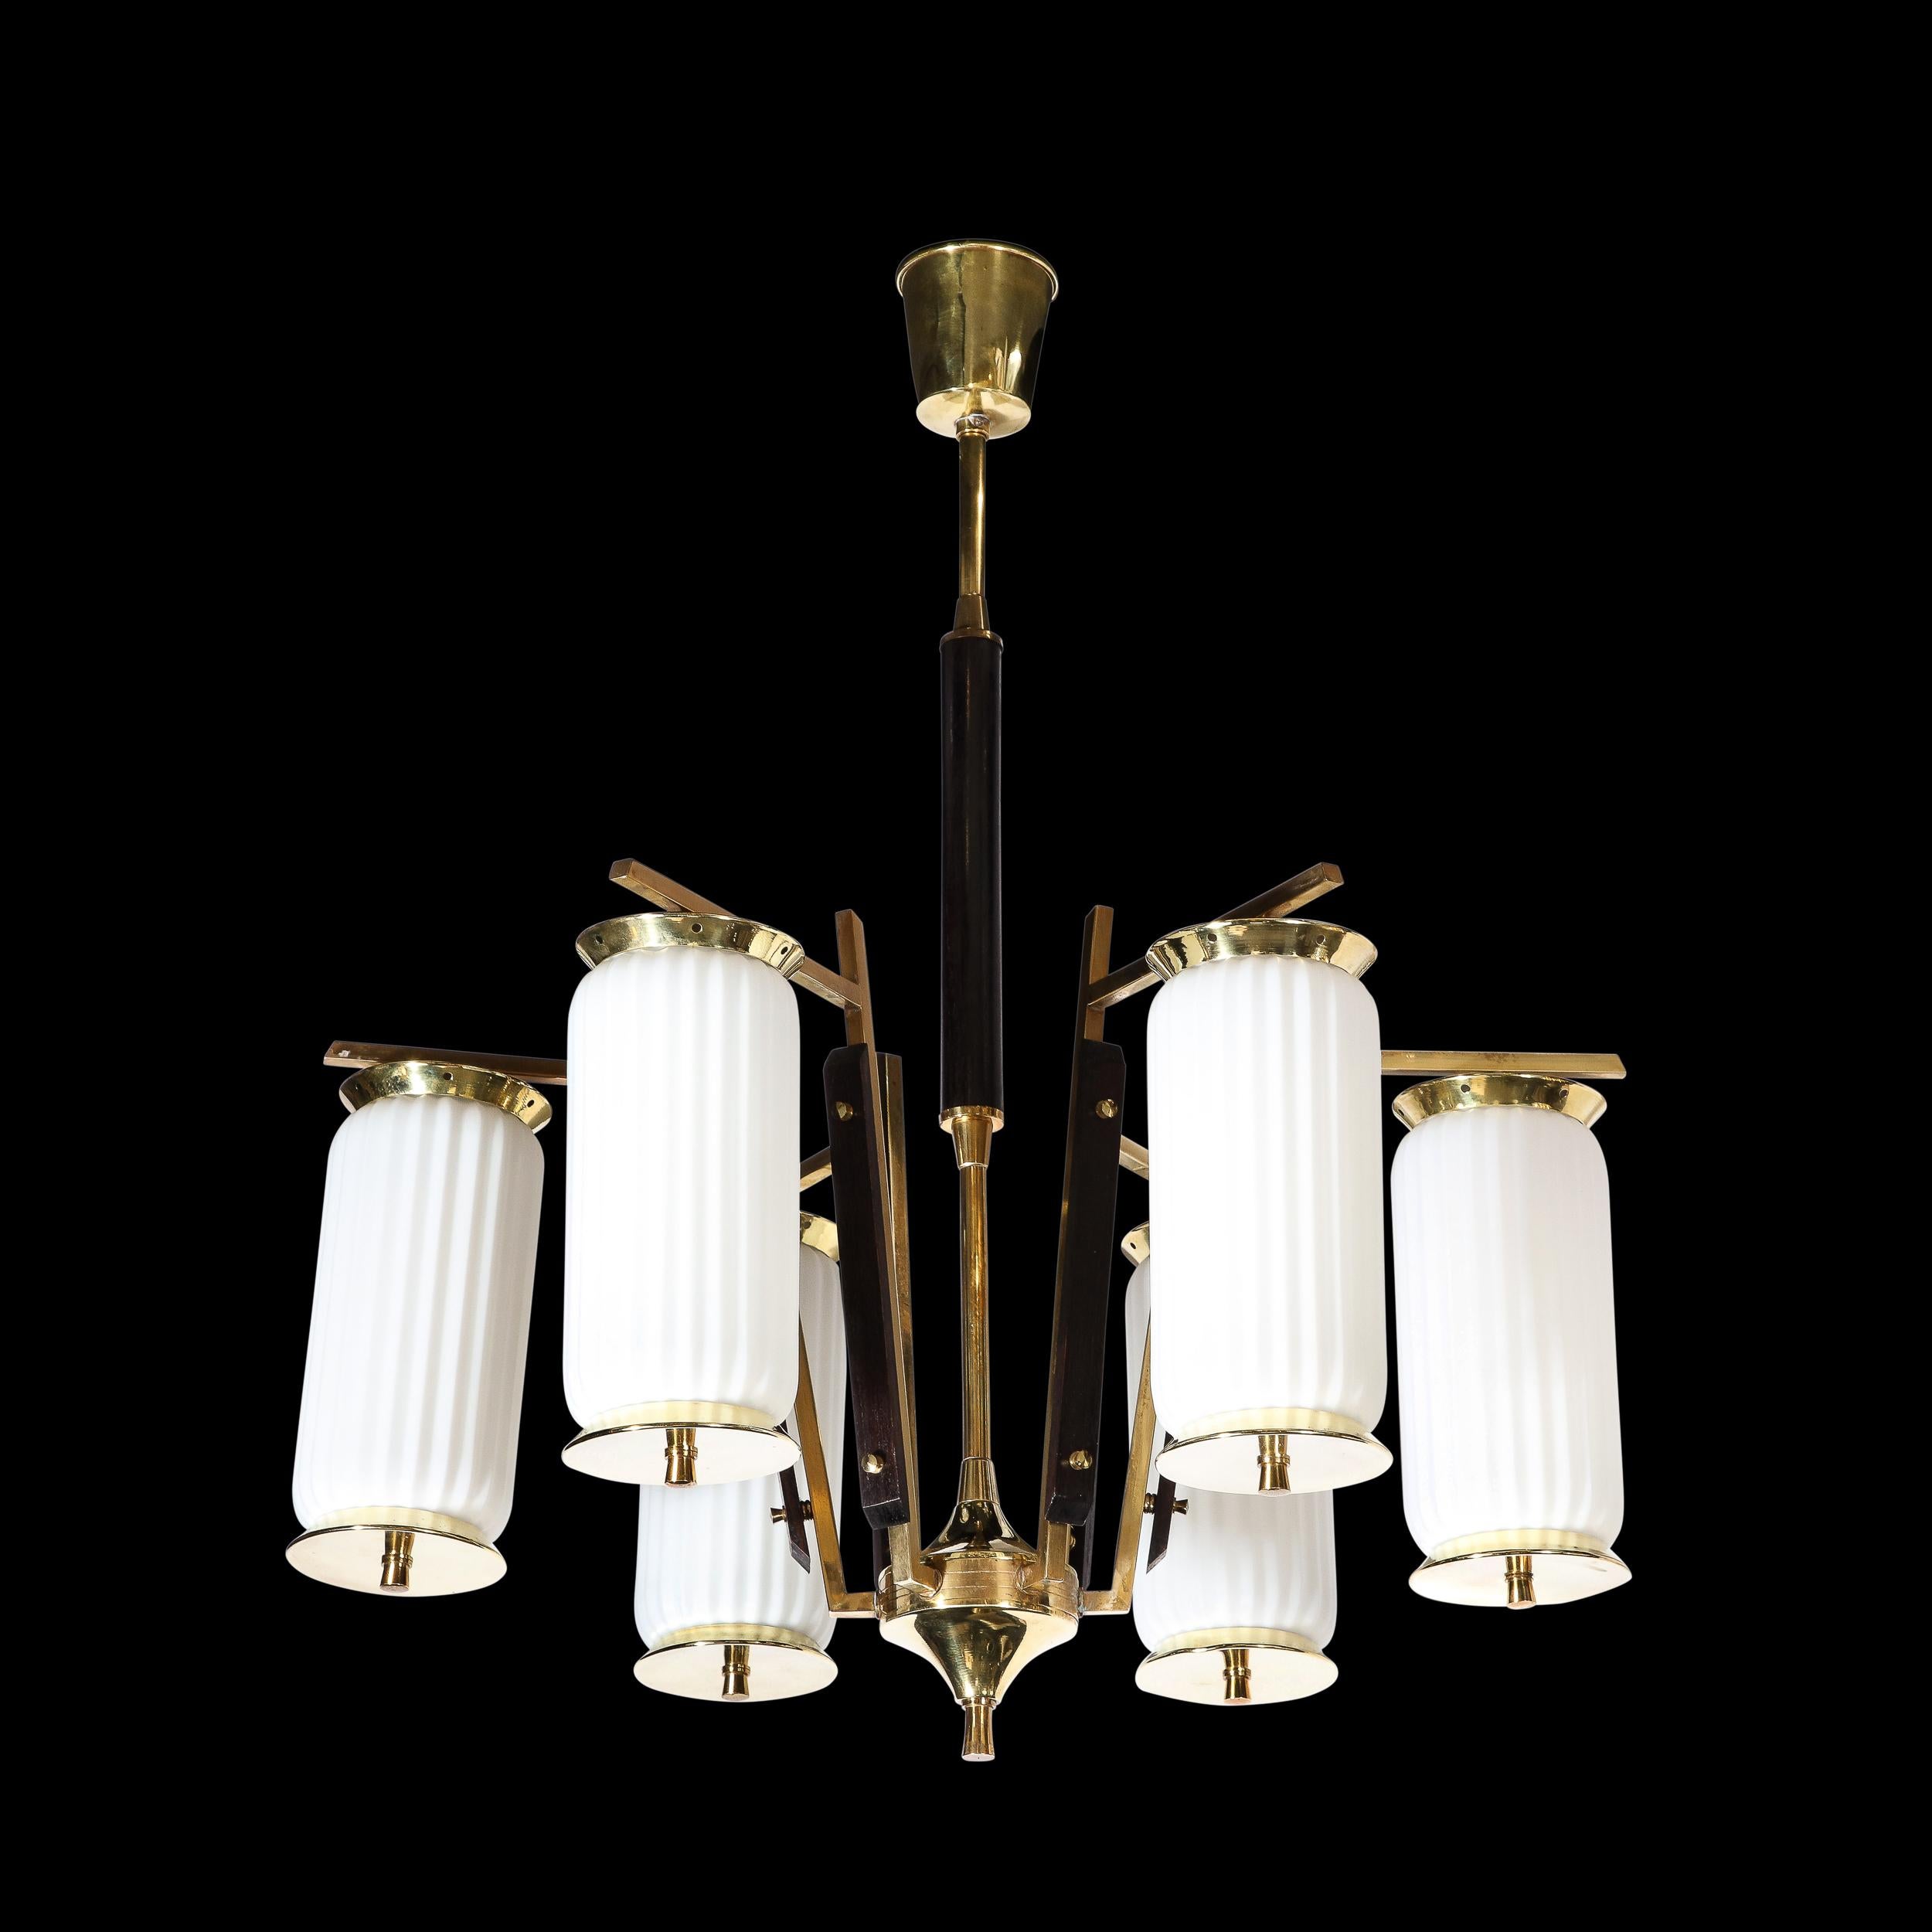 This handsome Mid-Century Modernist Brass, Striated Glass & Ebonized Walnut Six Arm Chandelier originates from France circa 1960. A stunning gem of material variation with impeccable construction and design, this fixture features six striated